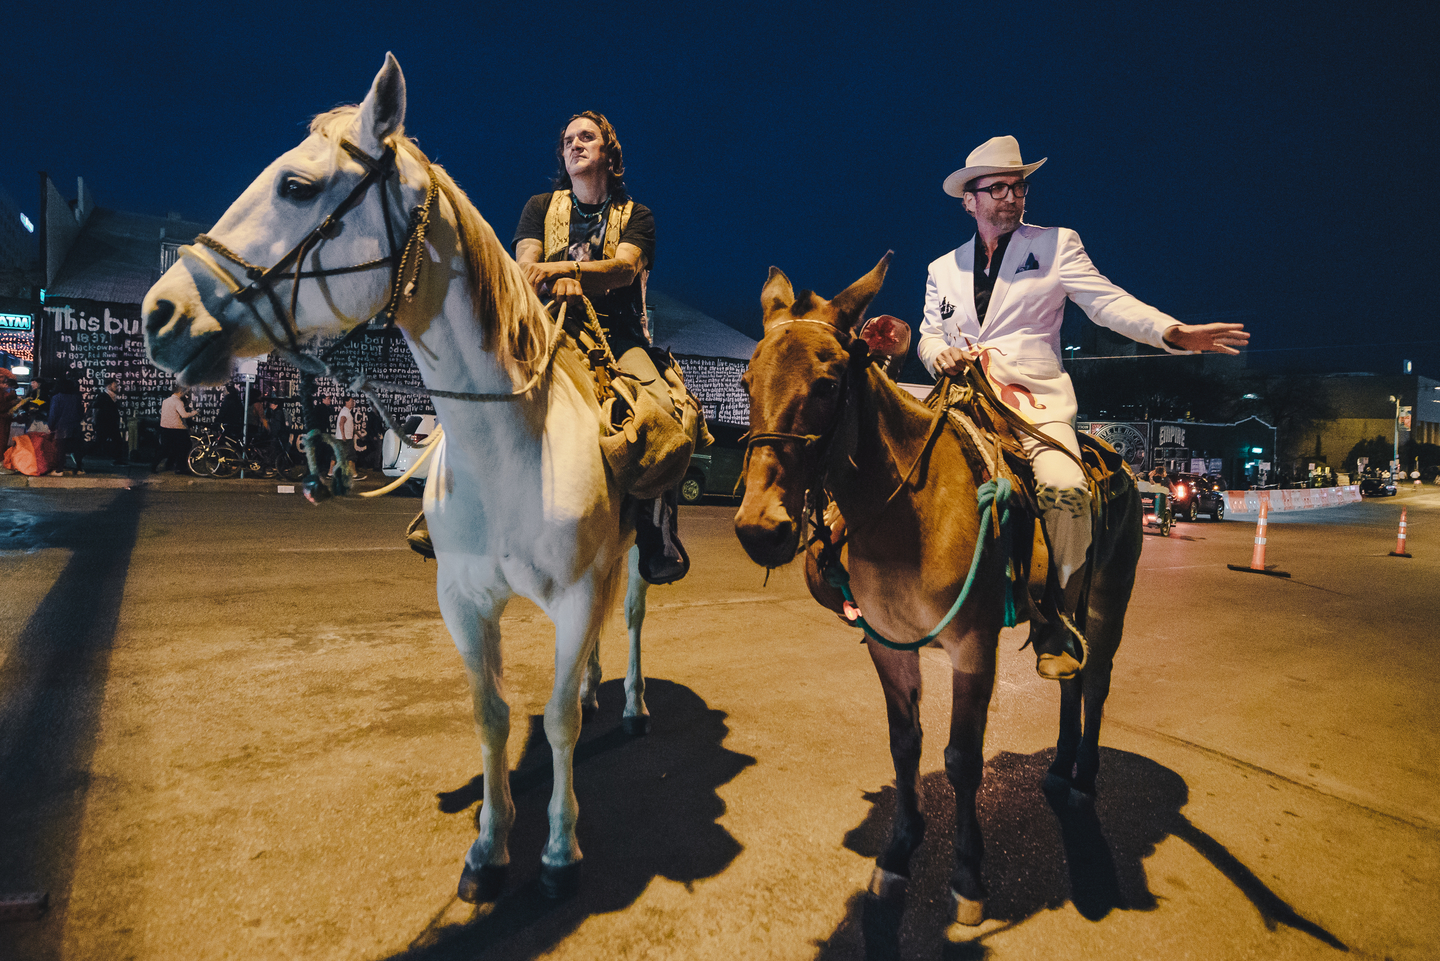 Samuel Grey Horse offers the traditional Texas transportation option to SXSW visitors. Photo by Judy Won